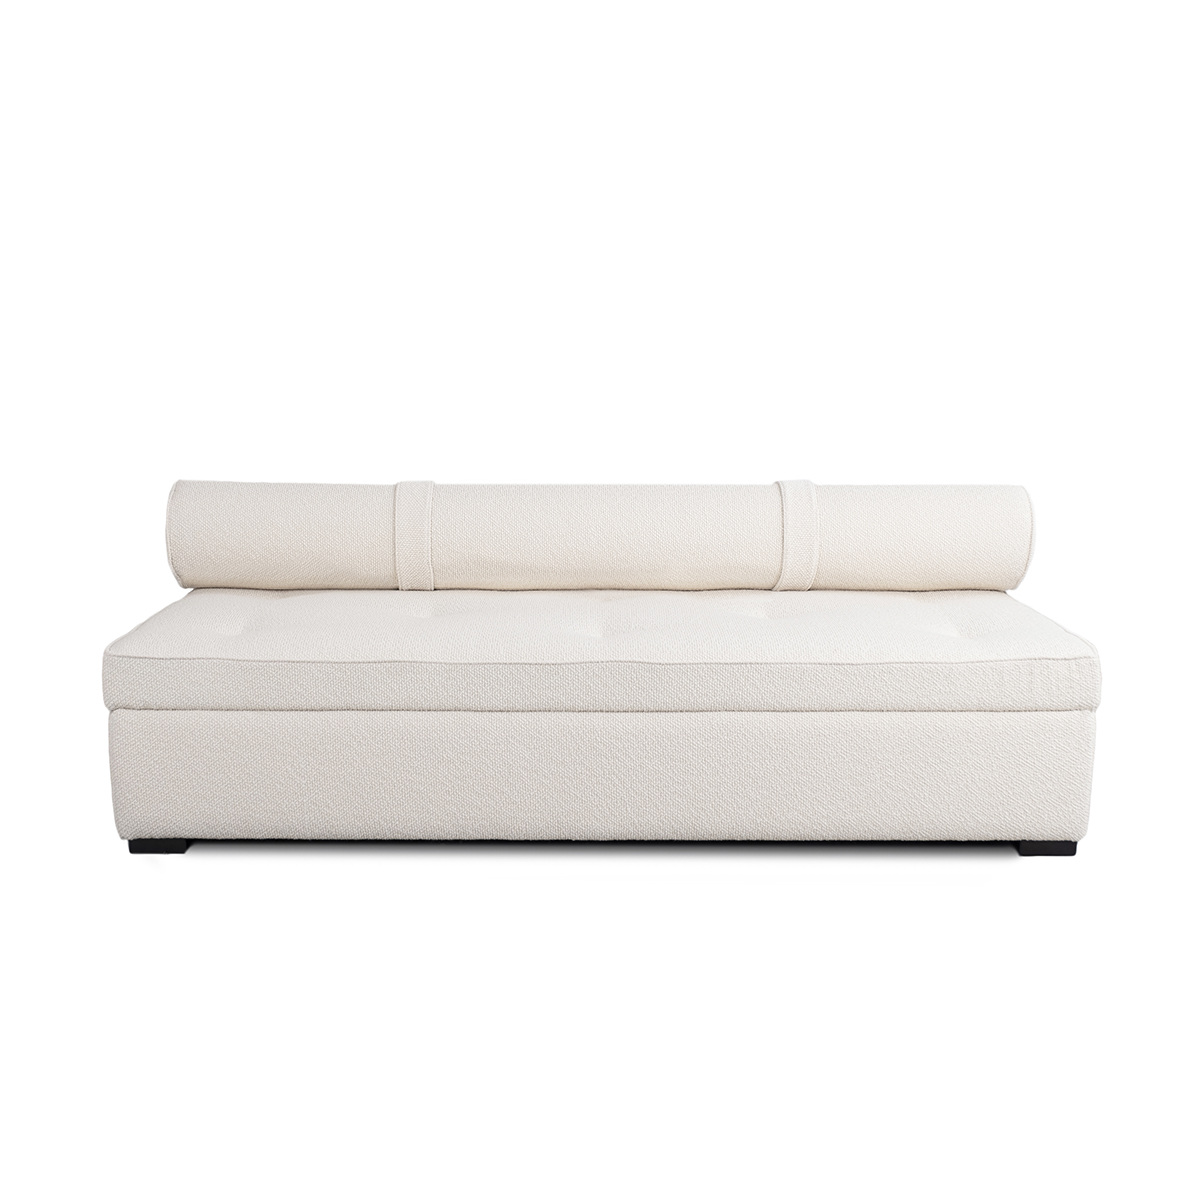 Banquette Jacob, White - L185 x W75 x H40 - Curly wool - image 1